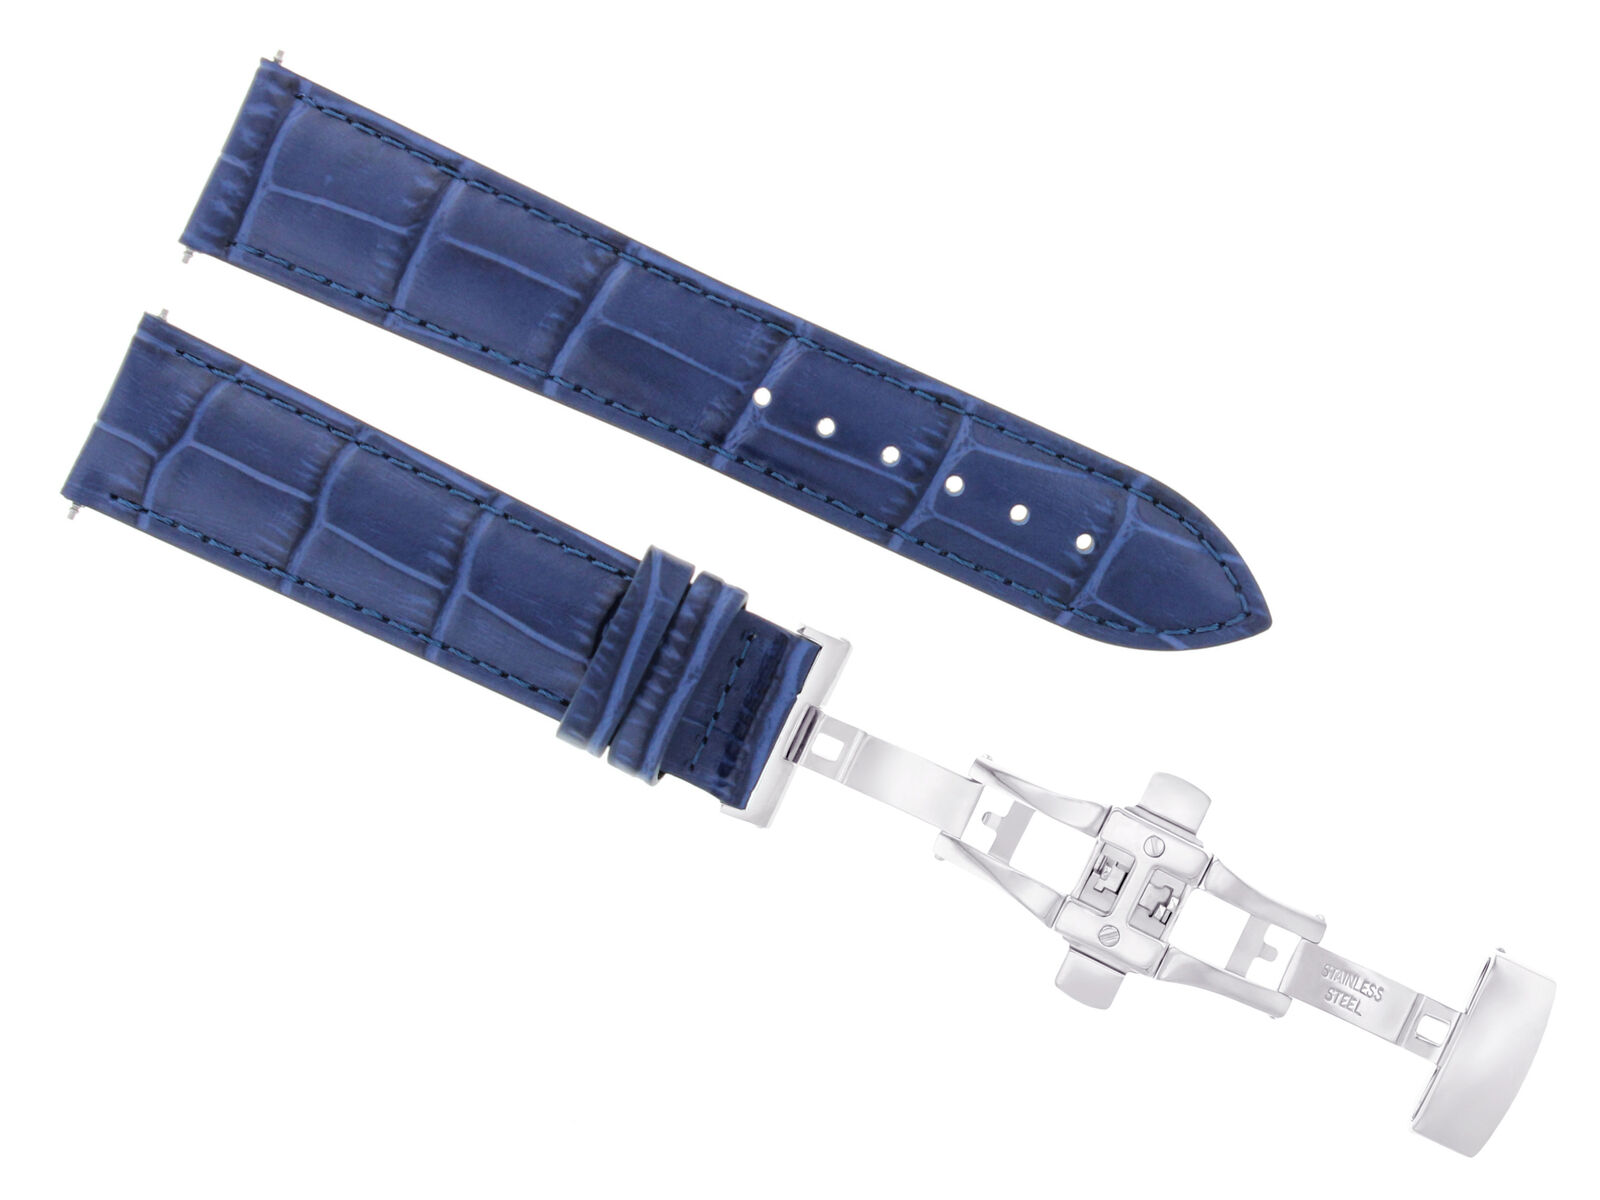 22MM LEATHER WATCH BAND STRAP FOR CITIZEN ECODRIVE E870 ALTICHRON + CLASP BLUE